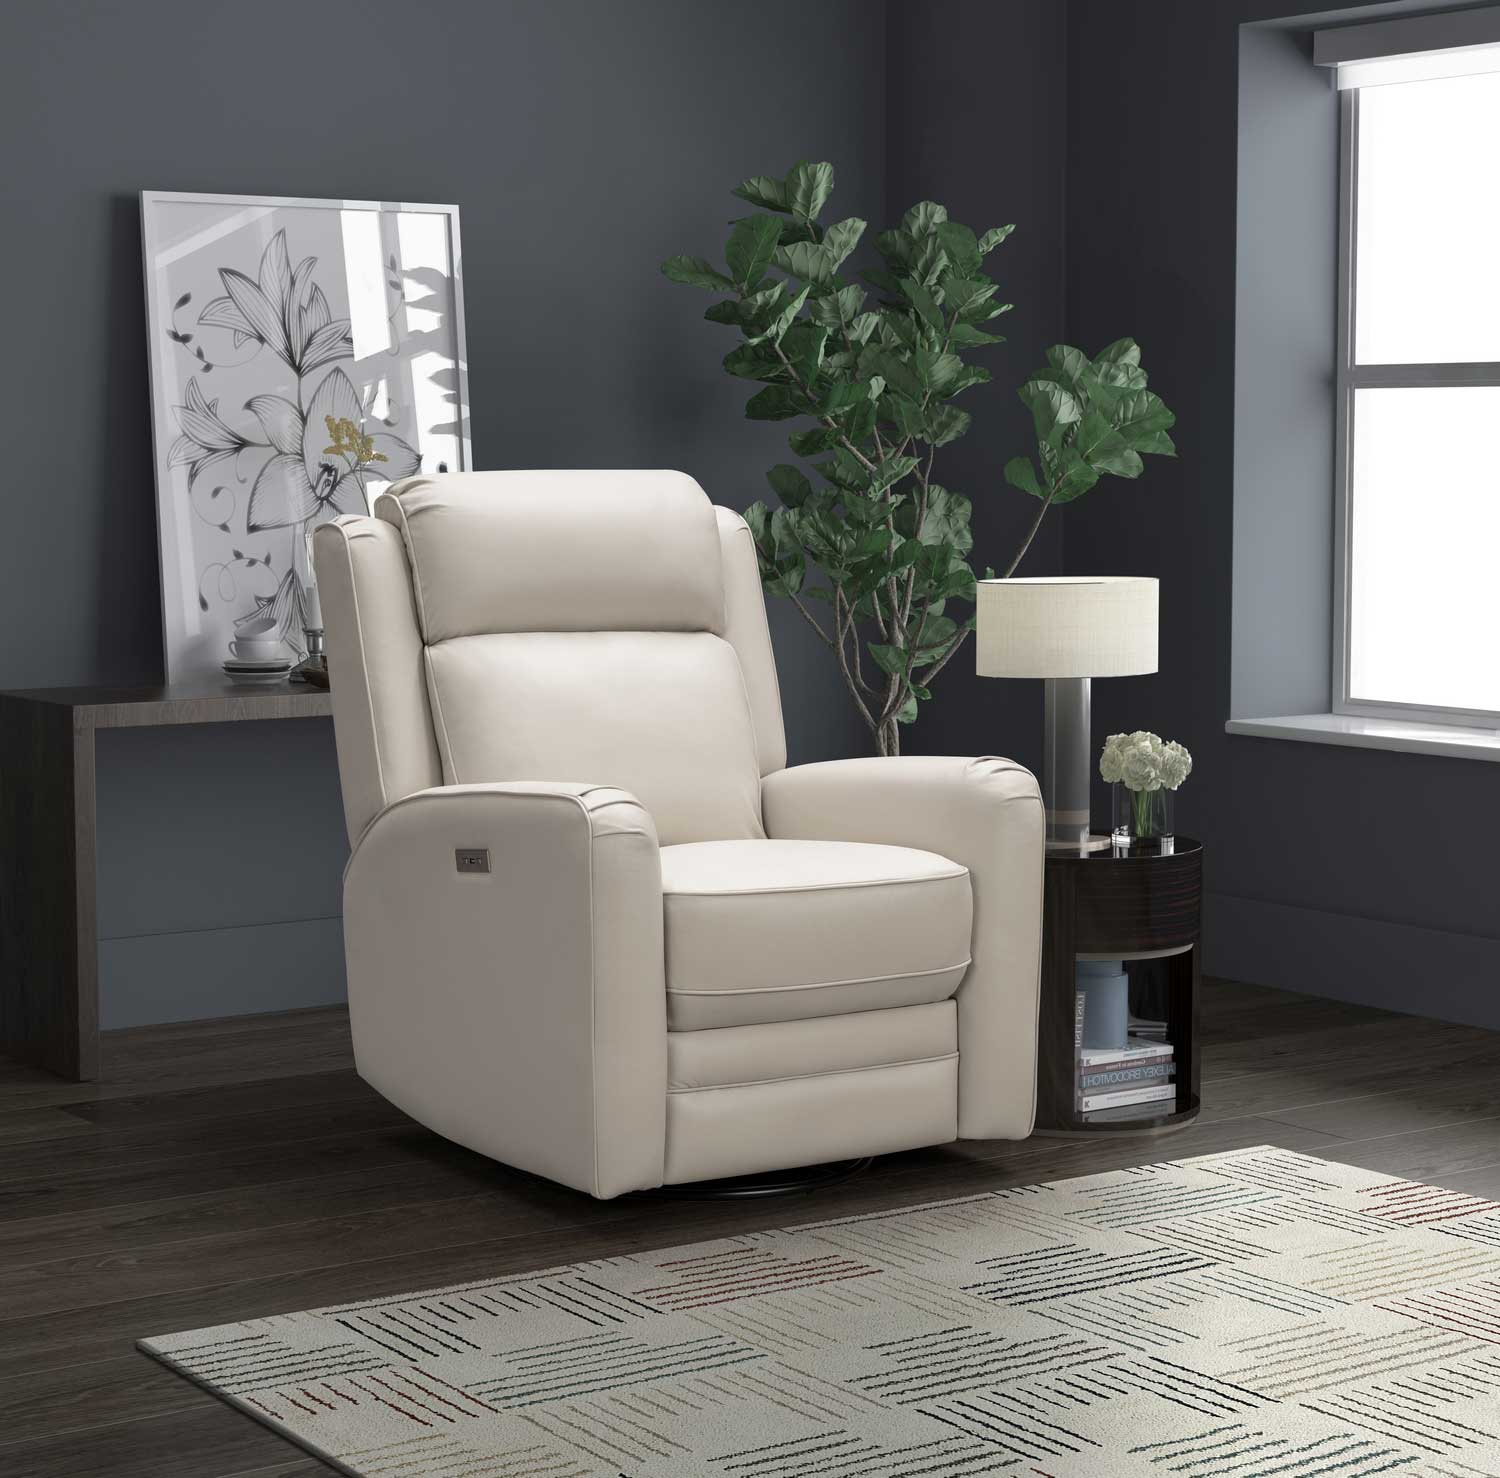 Barcalounger Kennedy Big and Tall Power Swivel Recliner Chair with Power Head Rest - Laurel Cream/Leather Match